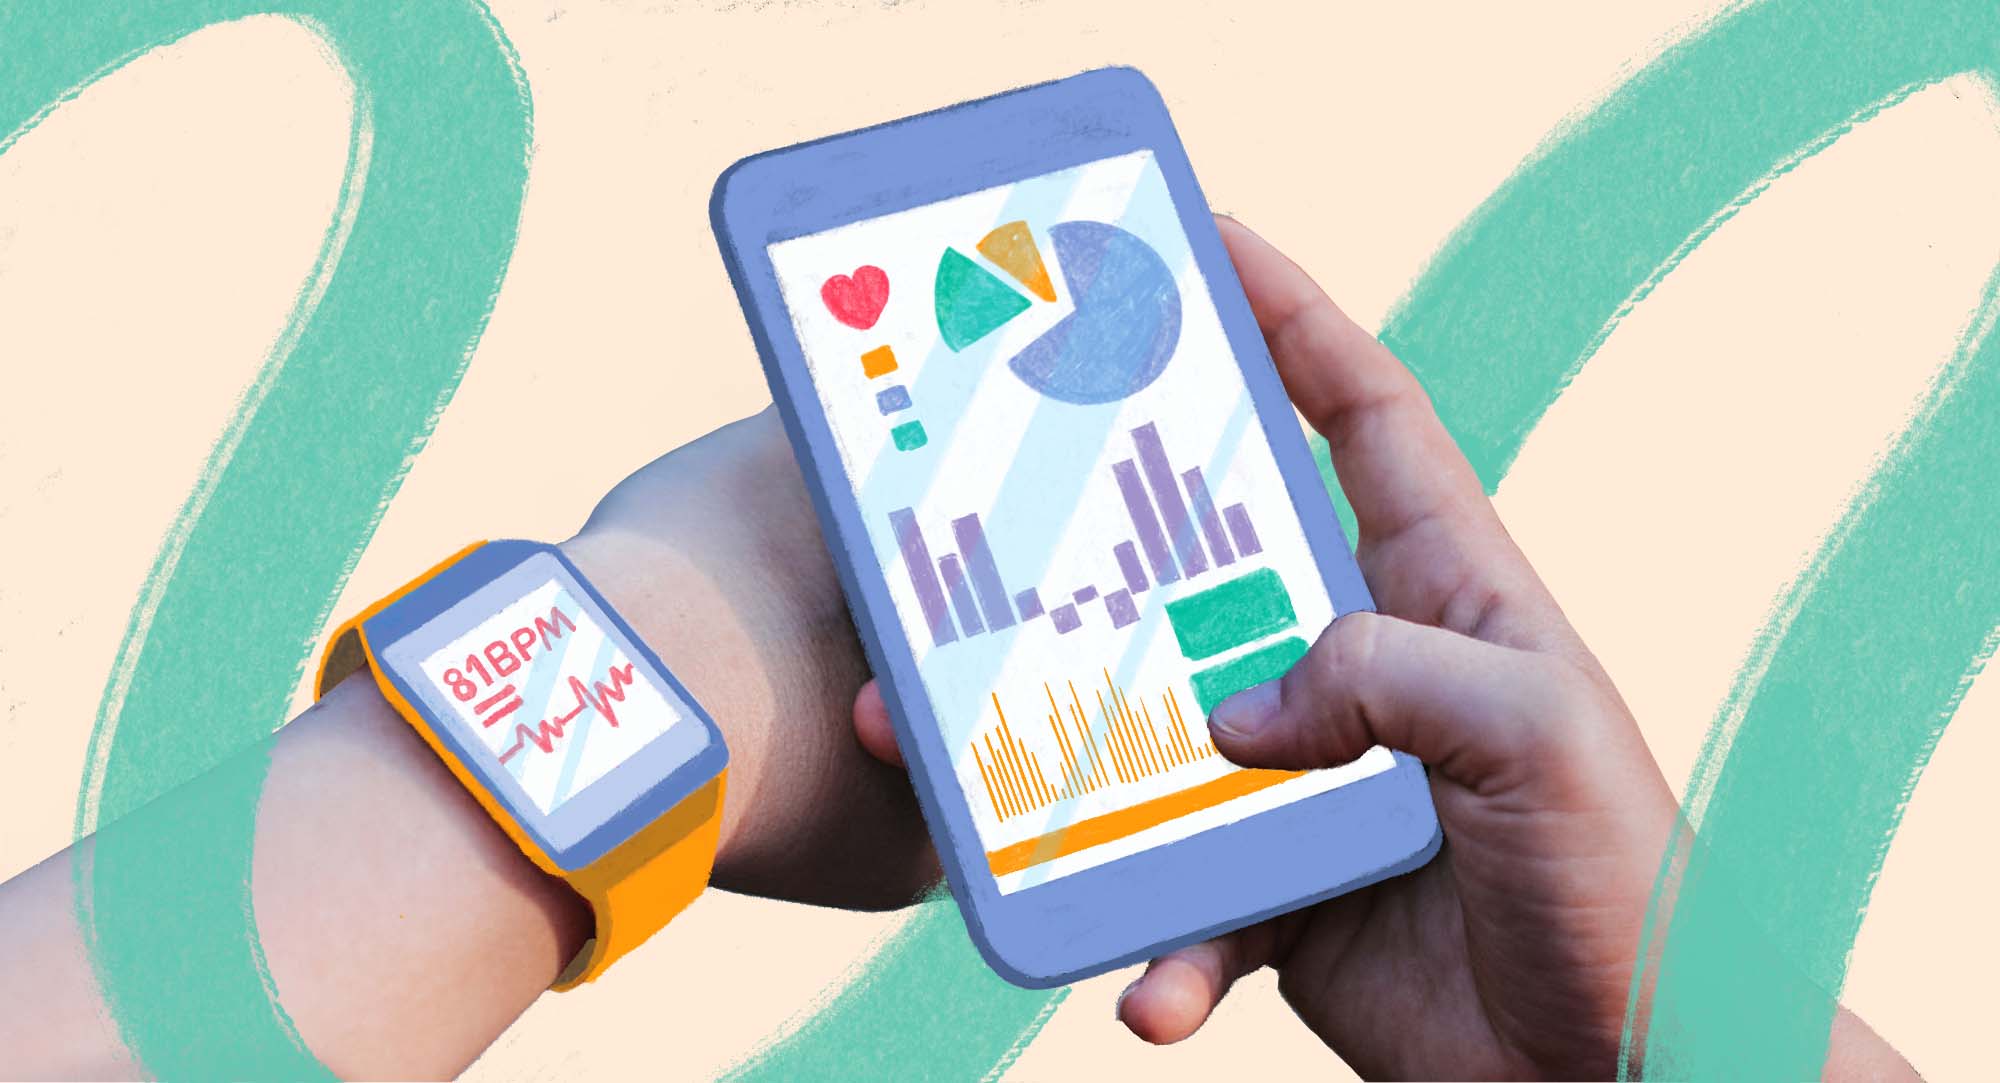 On The Surface: The Data of Wearables